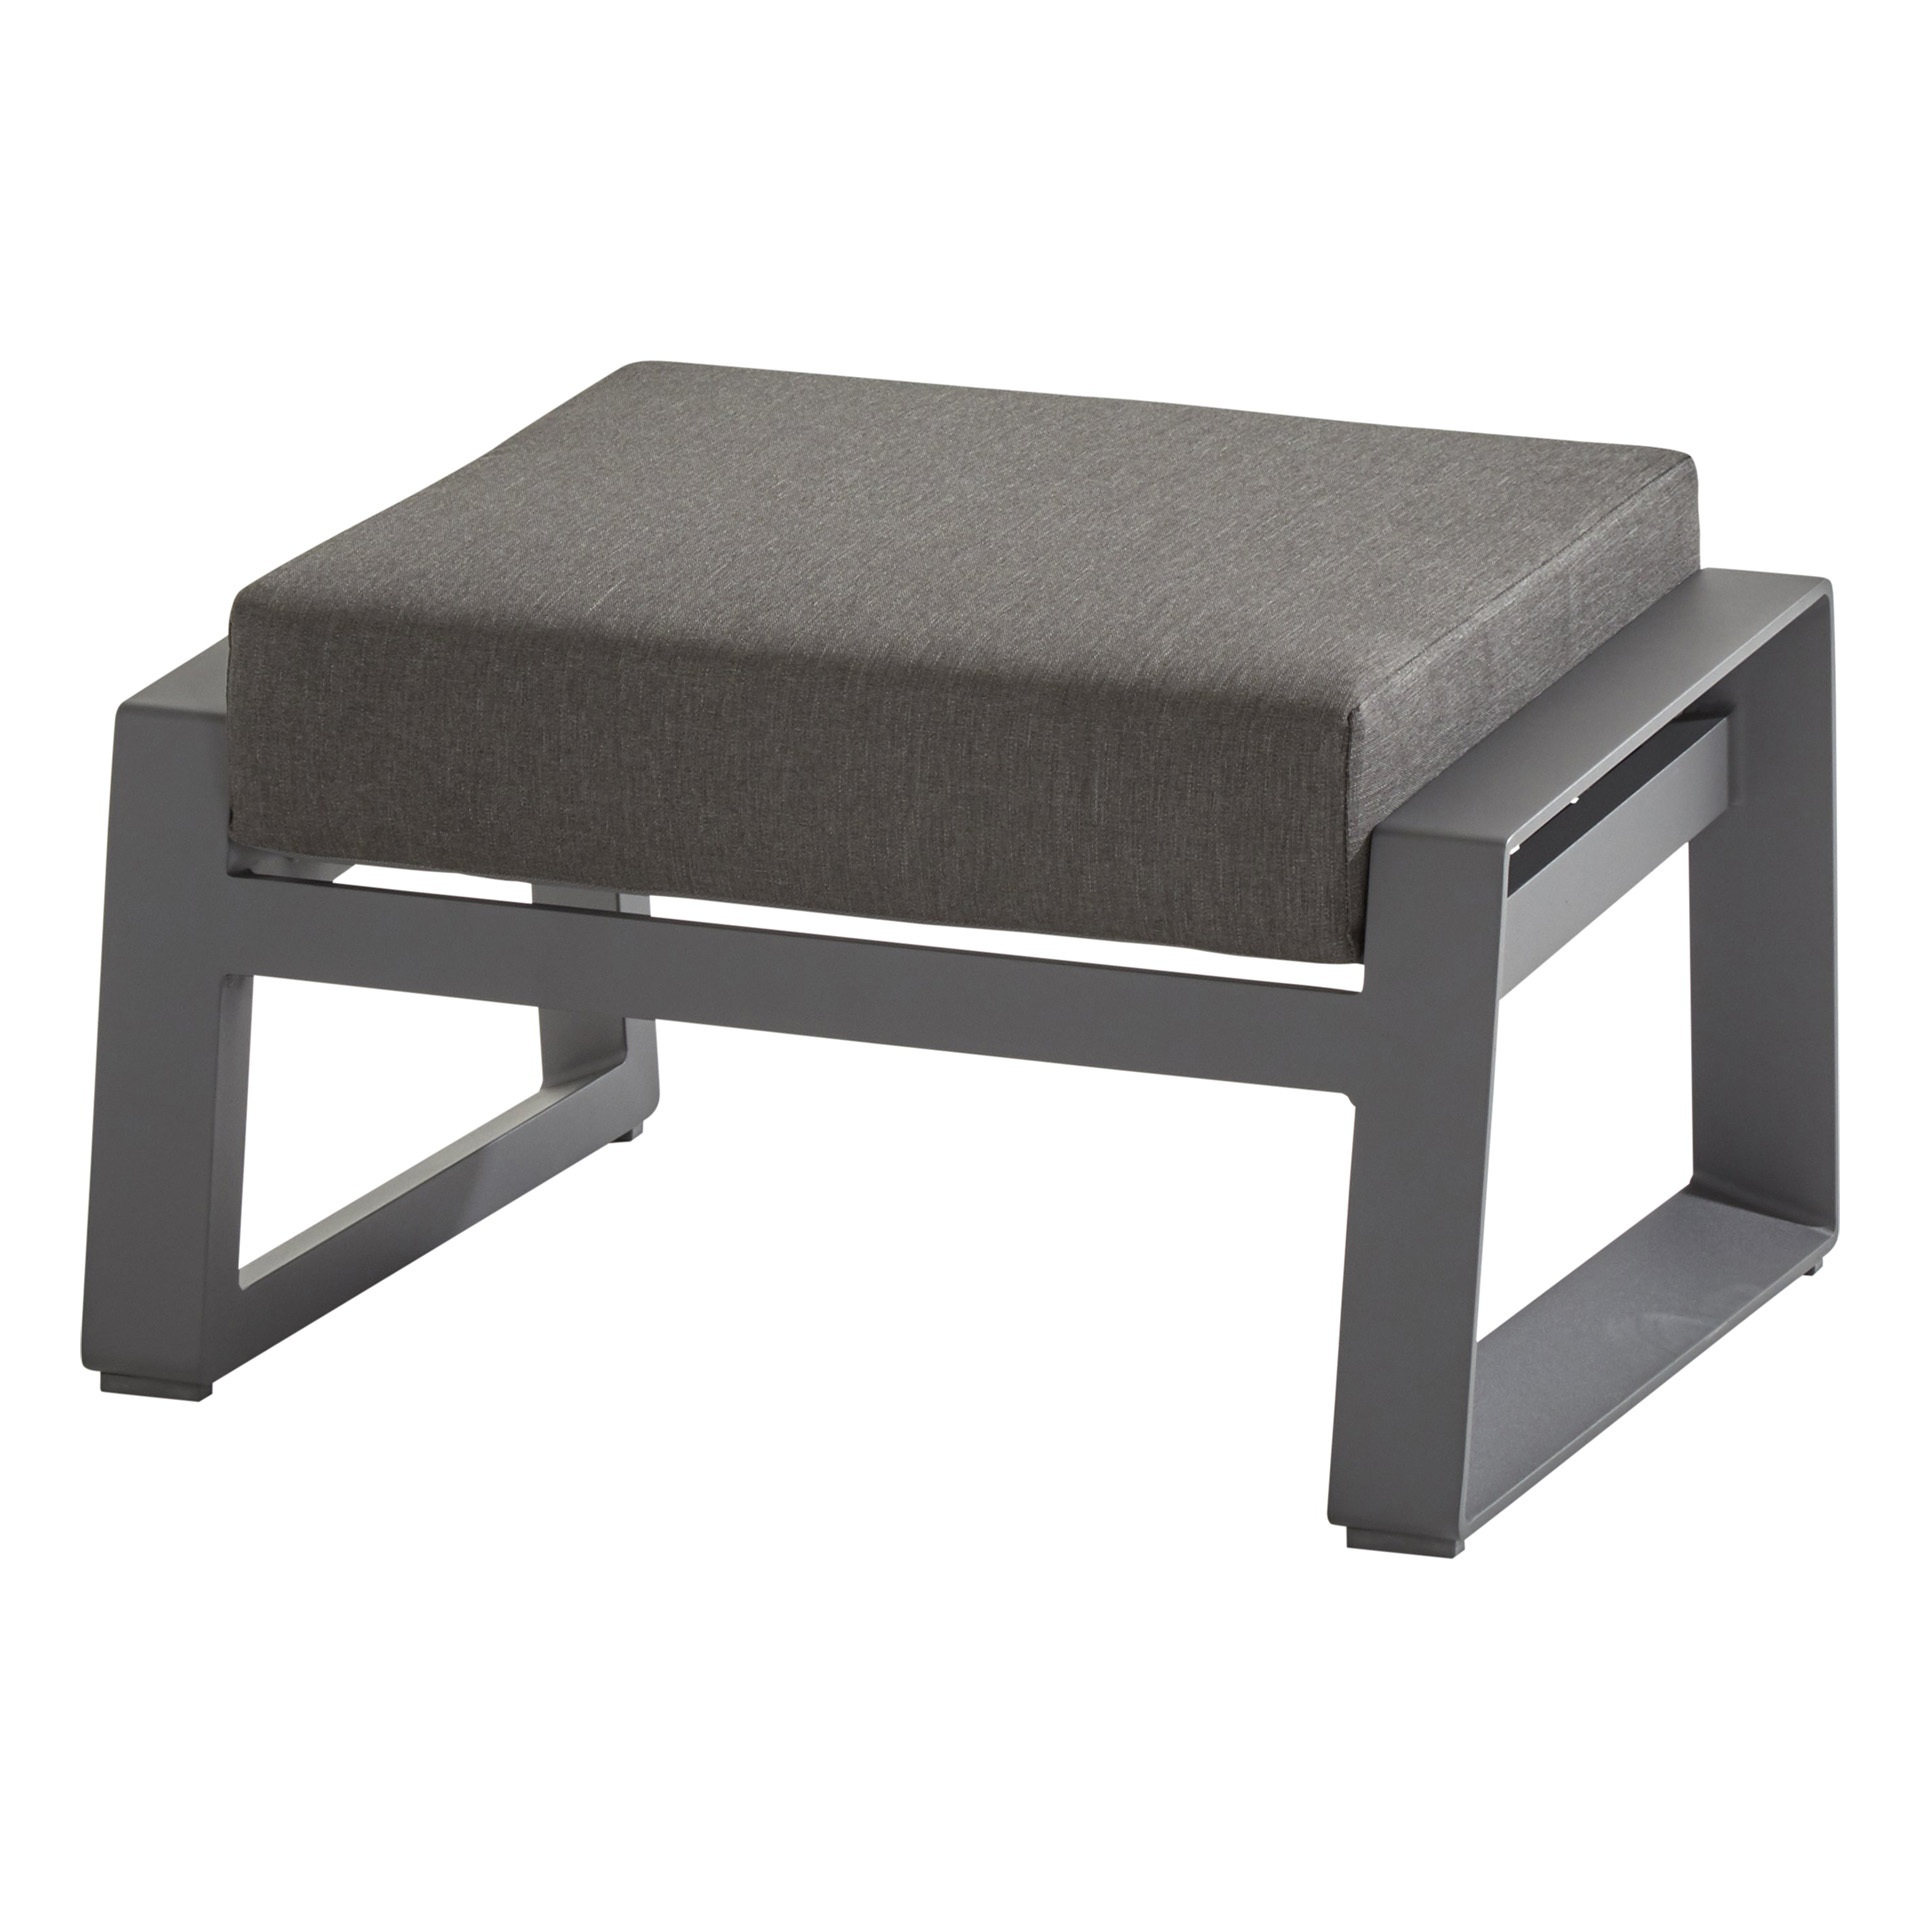 Dazzling Footstool with cushion 